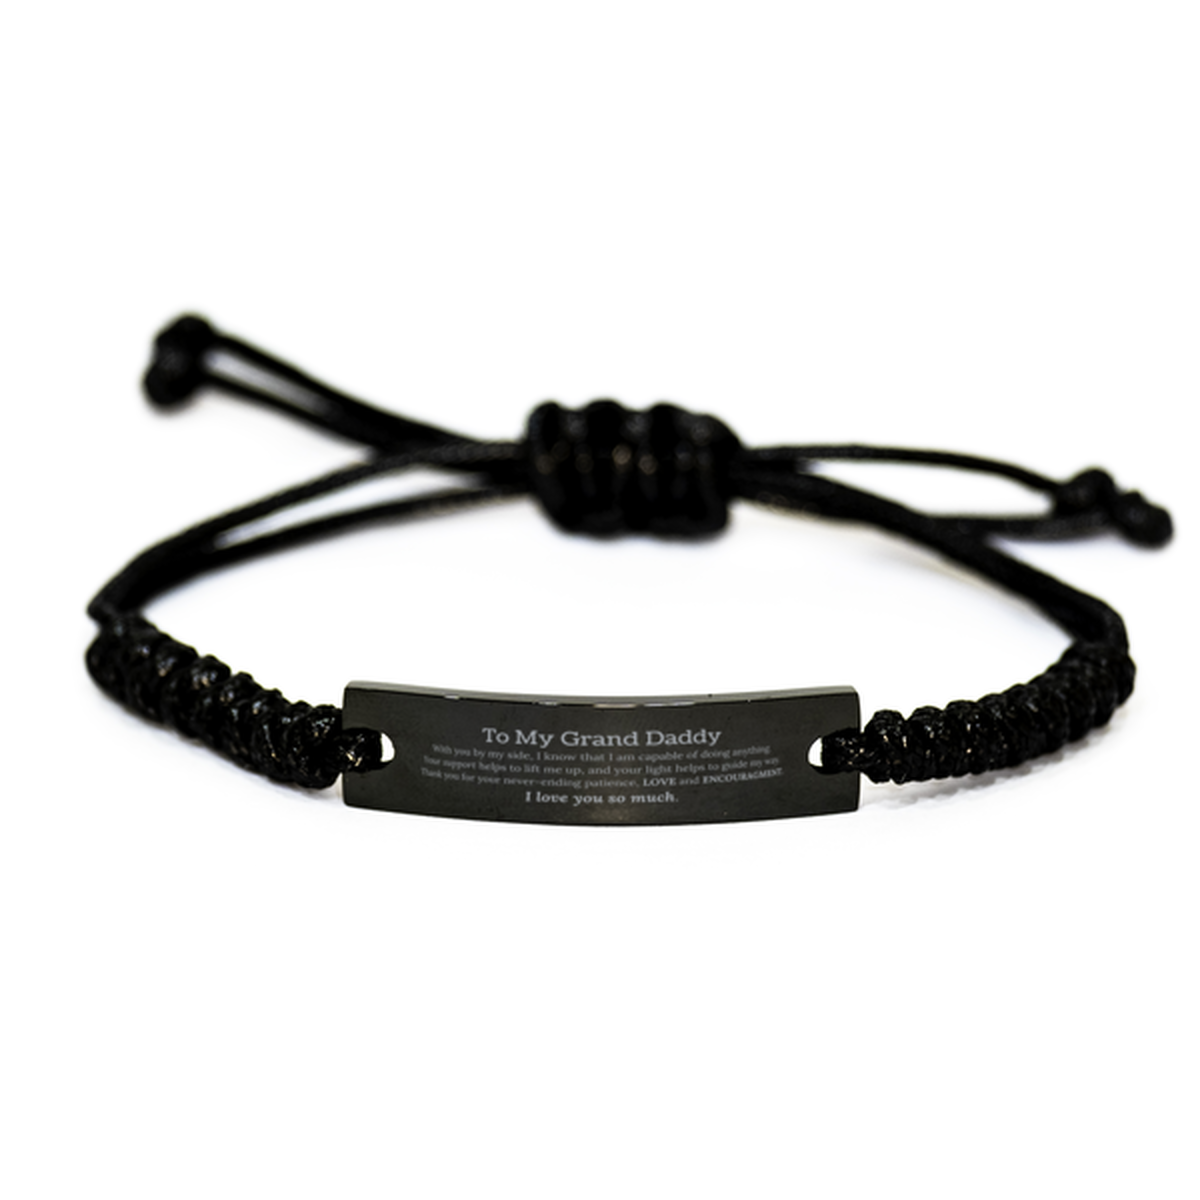 Appreciation Grand Daddy Black Rope Bracelet Gifts, To My Grand Daddy Birthday Christmas Wedding Keepsake Gifts for Grand Daddy With you by my side, I know that I am capable of doing anything. I love you so much